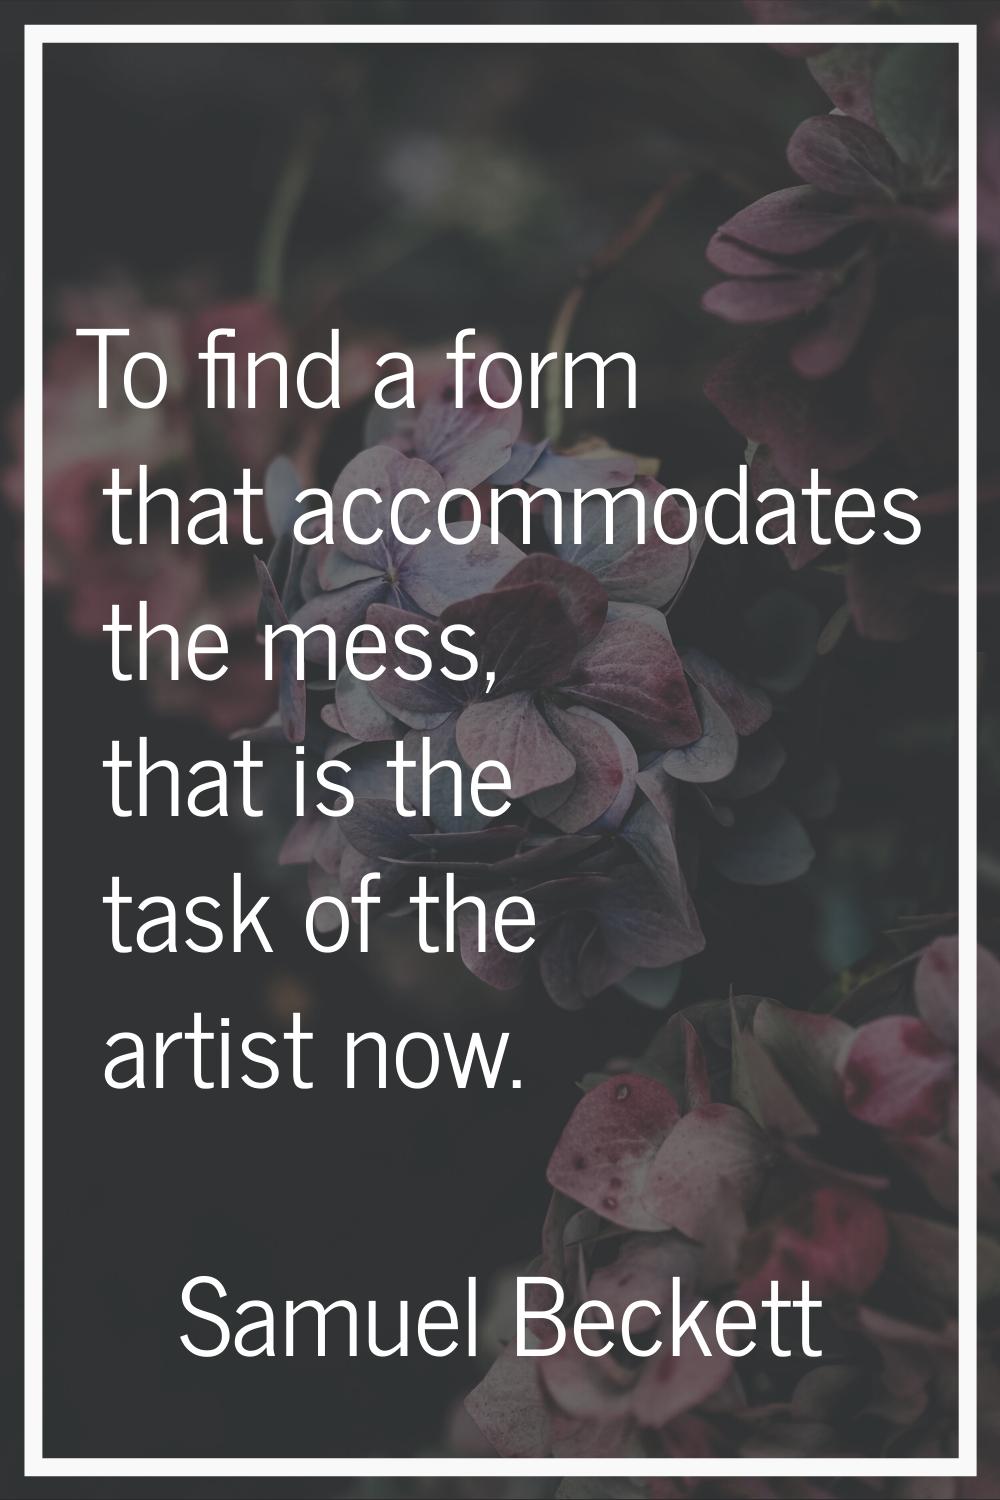 To find a form that accommodates the mess, that is the task of the artist now.